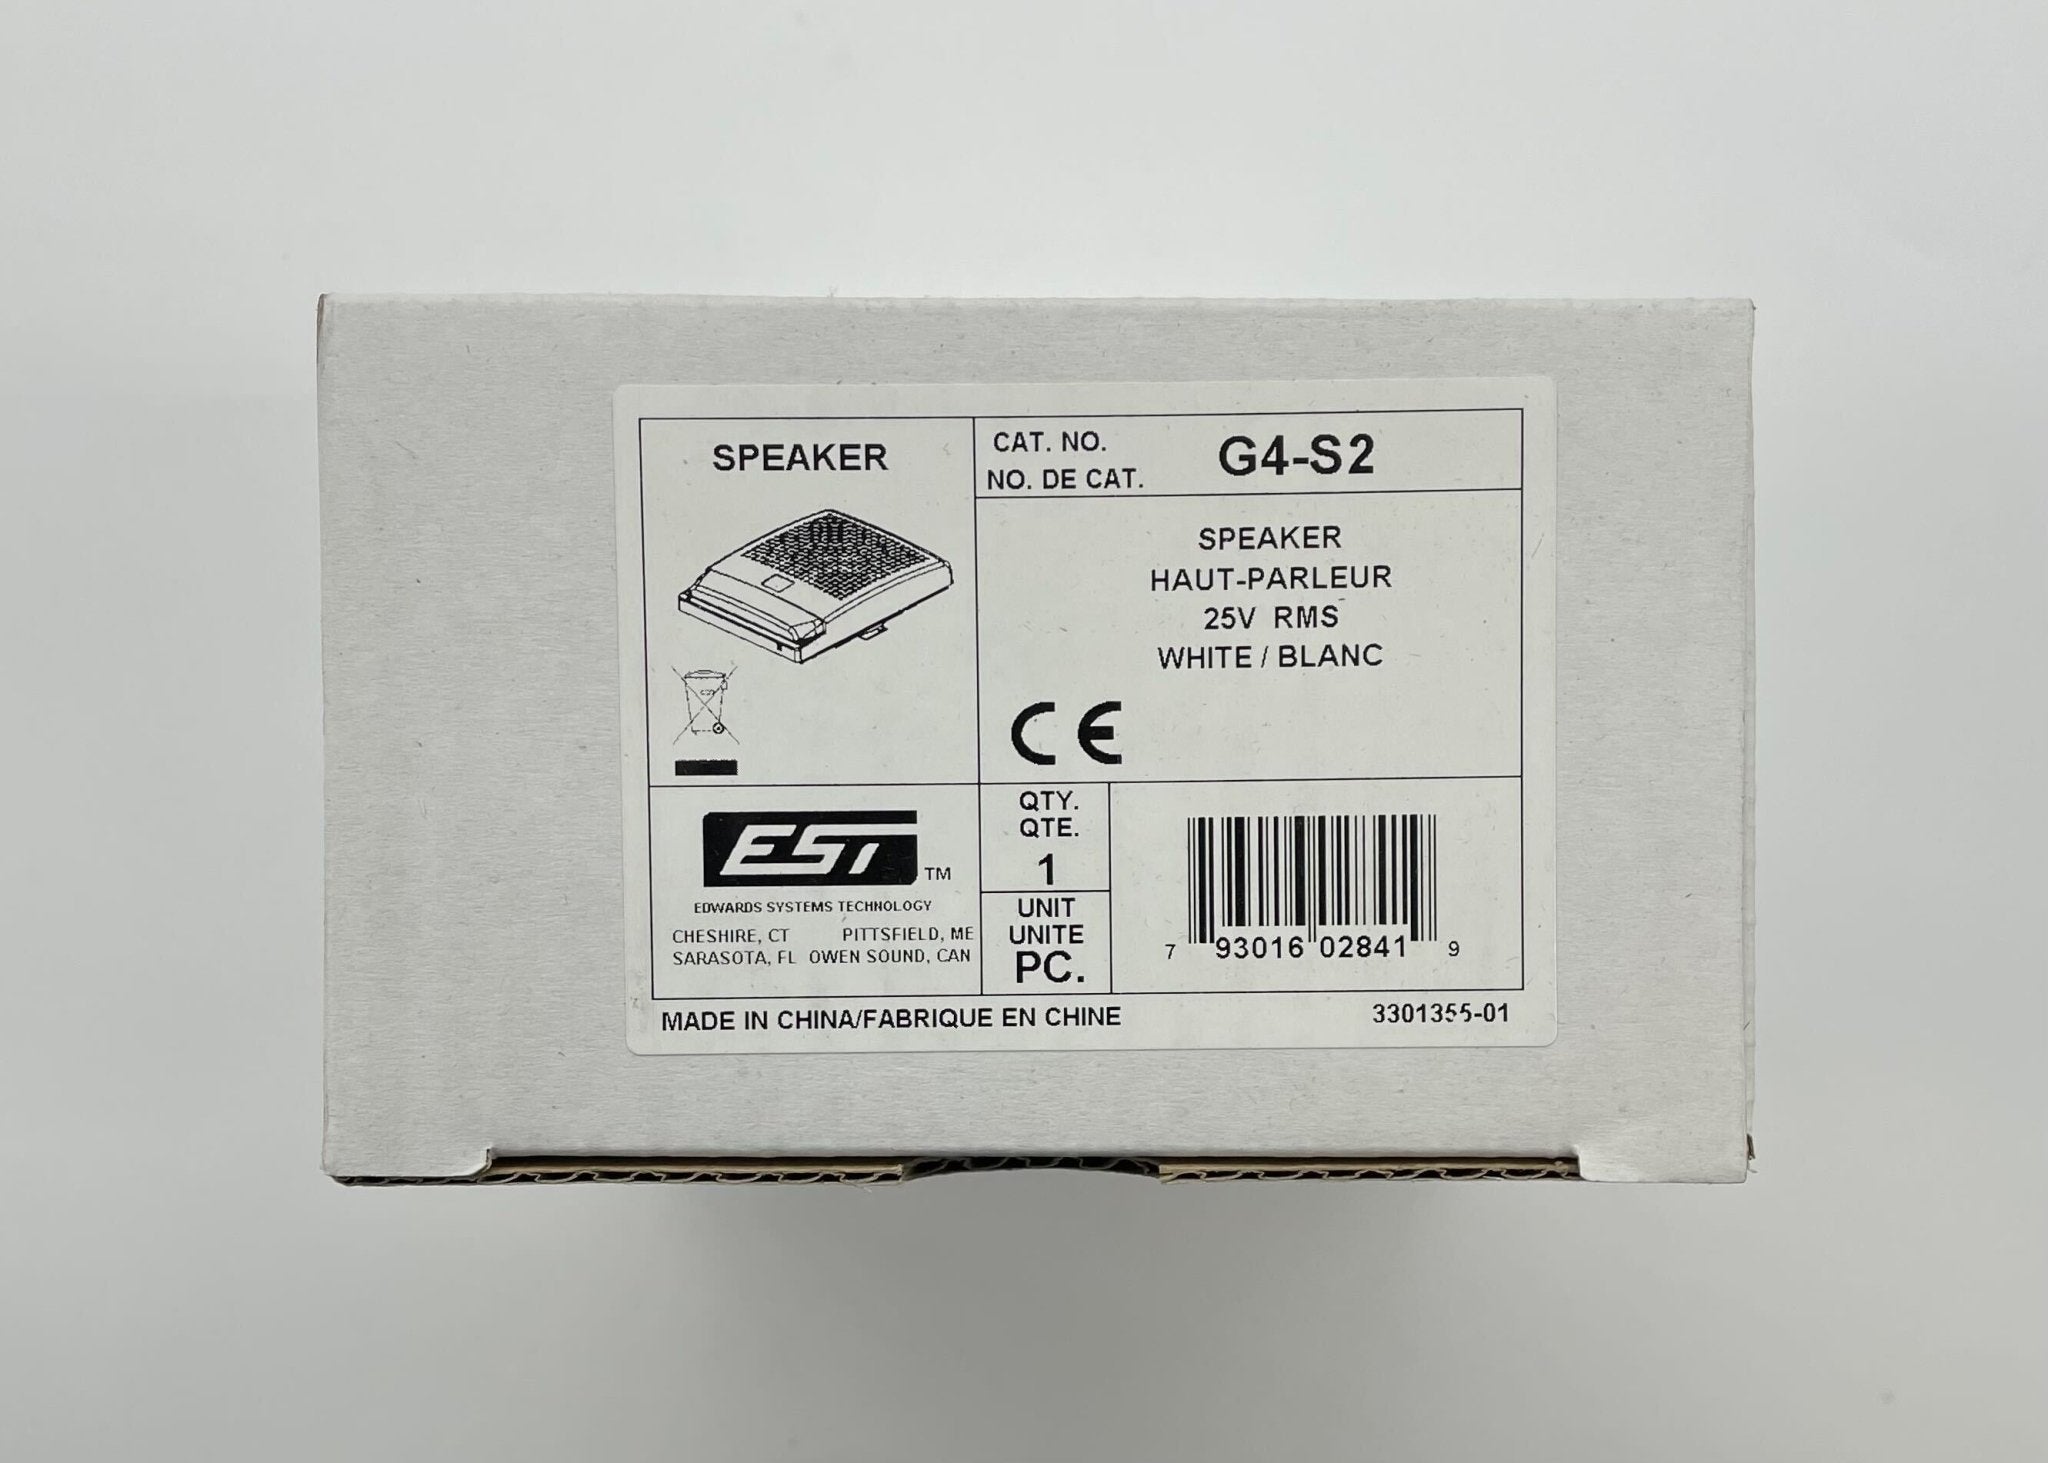 Edwards G4-S2 - The Fire Alarm Supplier